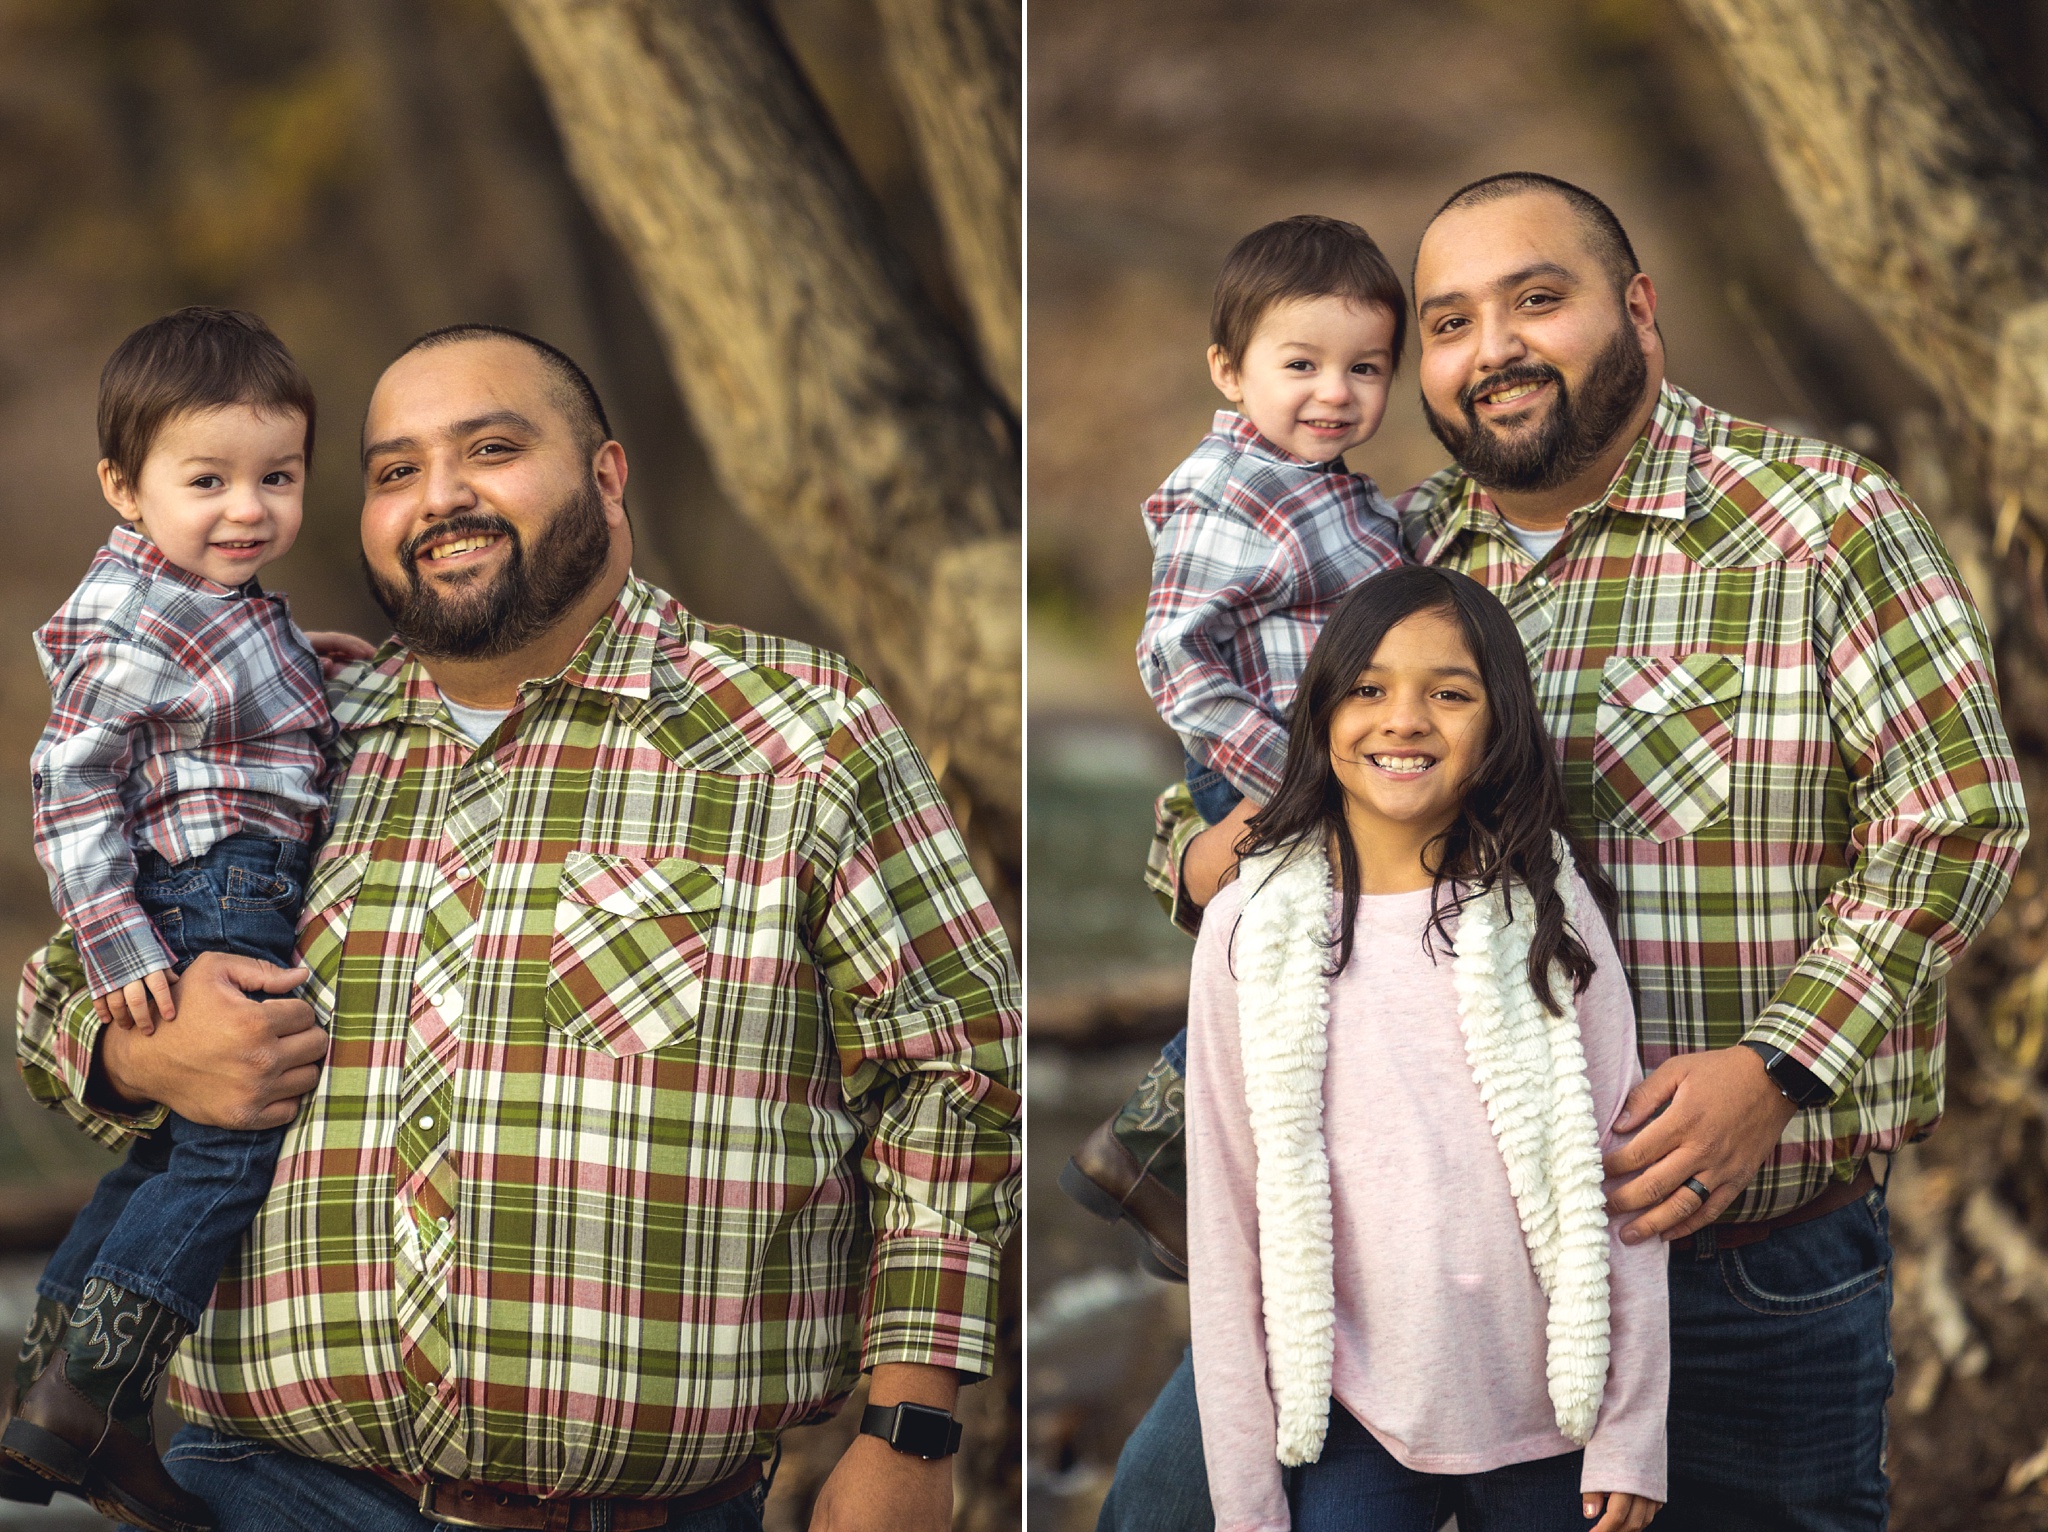 Dad & kids posing during fall family portraits. The Aguayo Family’s Fall Family Photo Session at Golden Ponds Nature Area by Colorado Family Photographer, Jennifer Garza. Golden Ponds Nature Area Family Photographer, Golden Ponds Nature Area, Golden Ponds, Golden Ponds Family Photographer, Longmont Family Photography, Longmont Family Photographer, Colorado Family Photos, Colorado Family Photographer, Colorado Fall Photos, Fall Photos